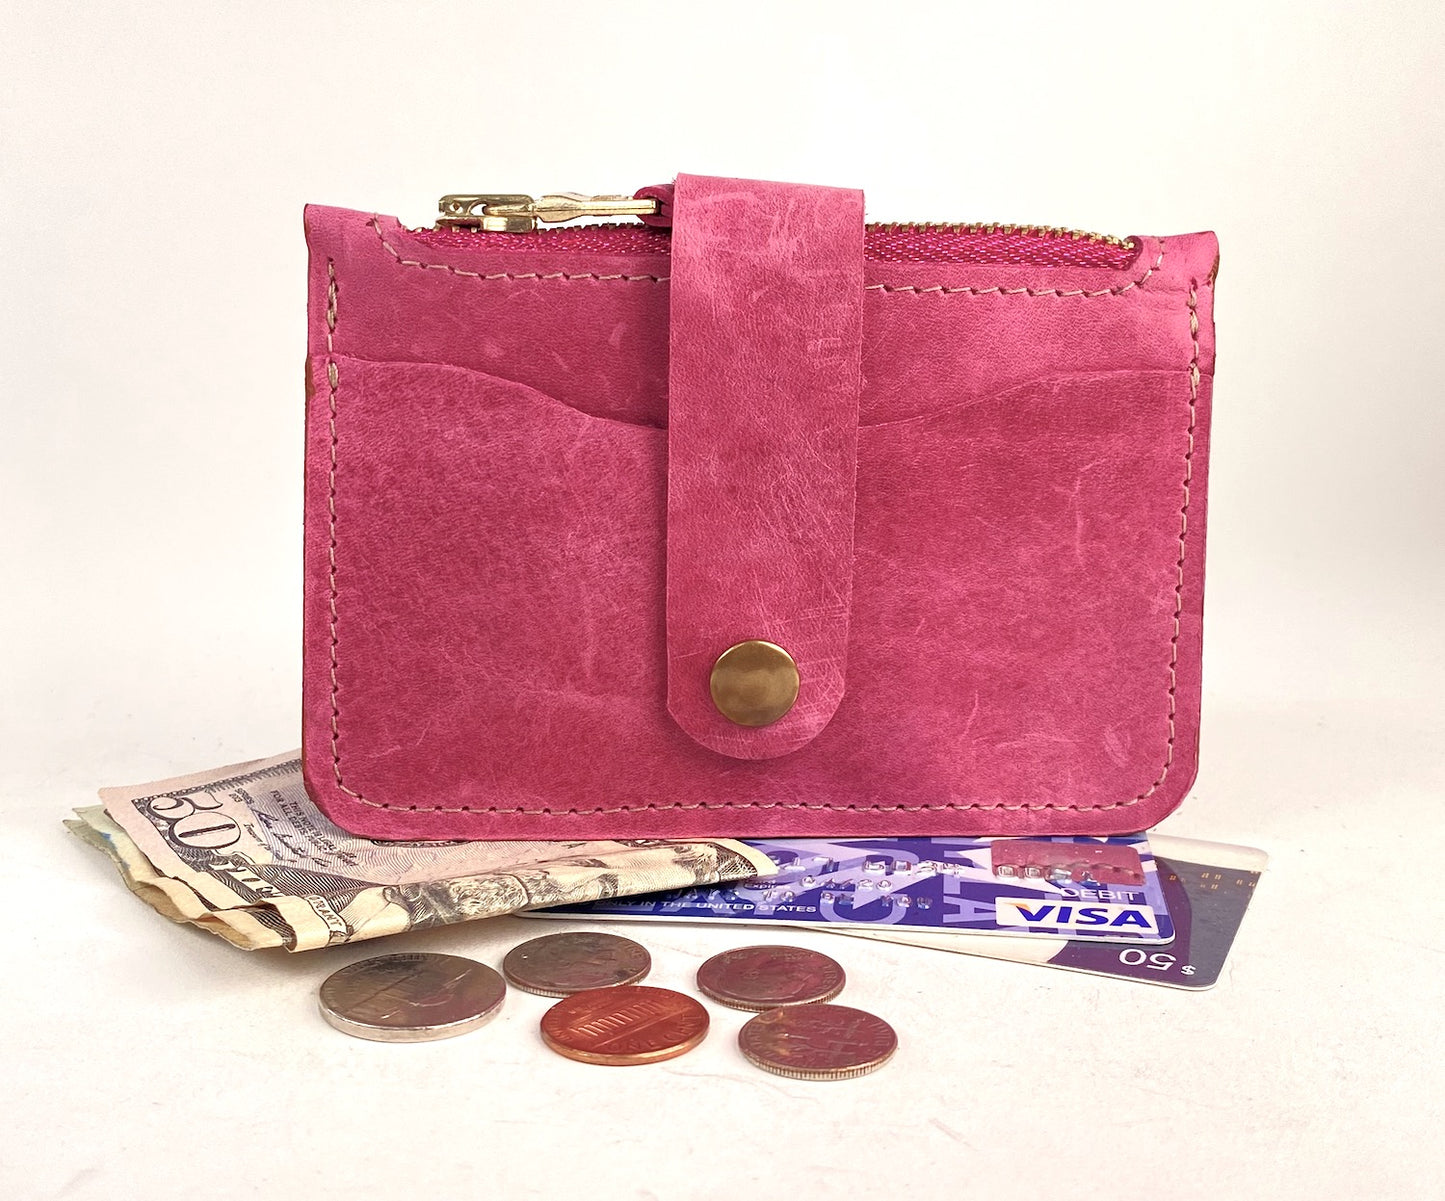 CardGuard Minimalist Leather Wallet in Pink